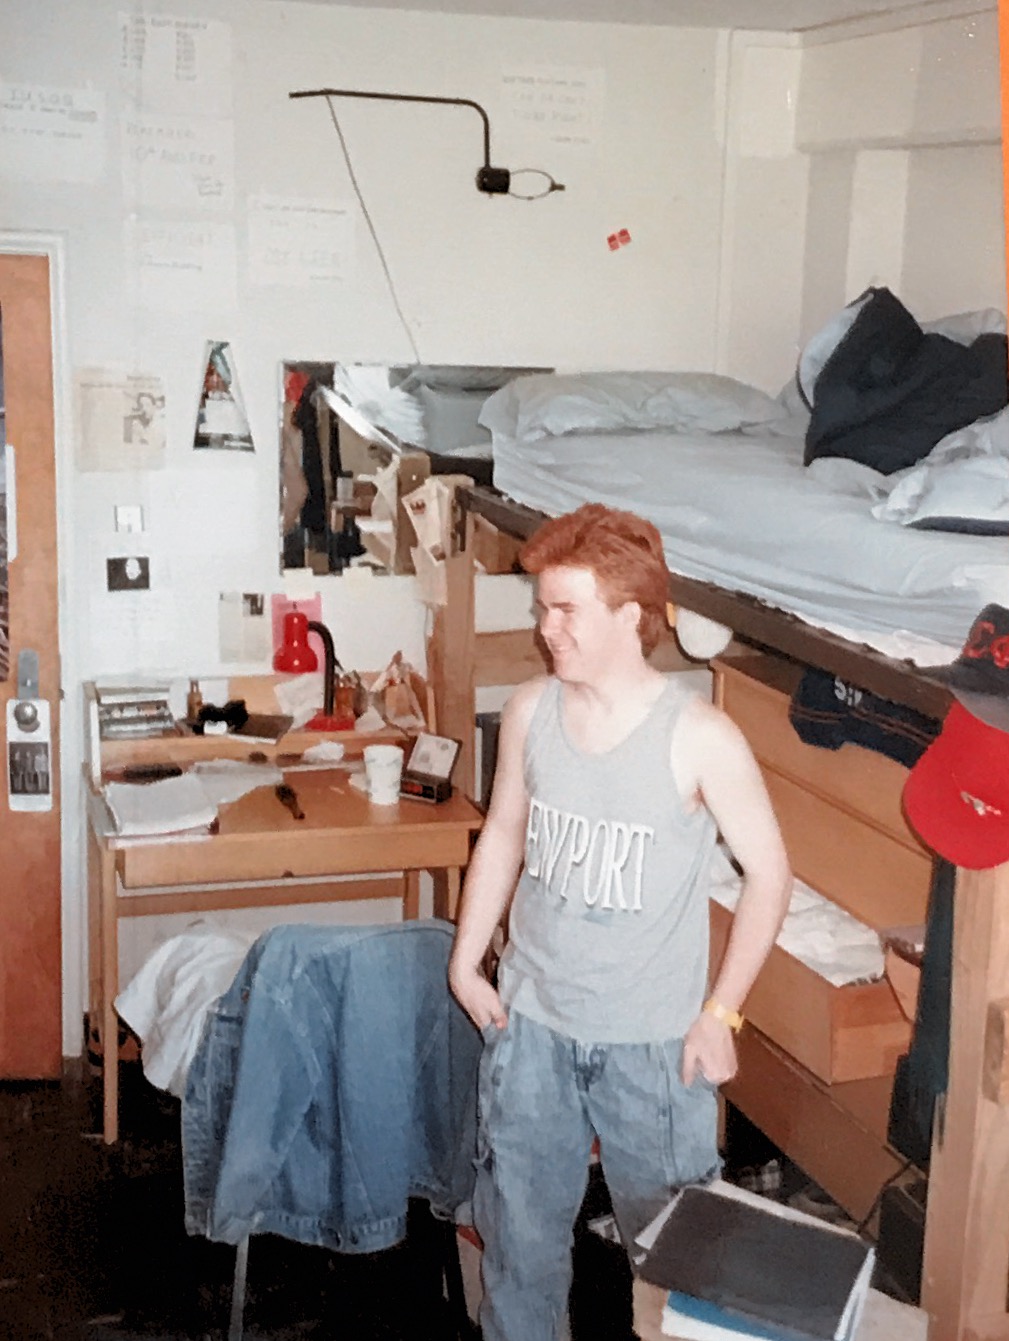 Glimpse of my room at Read Hall -1990